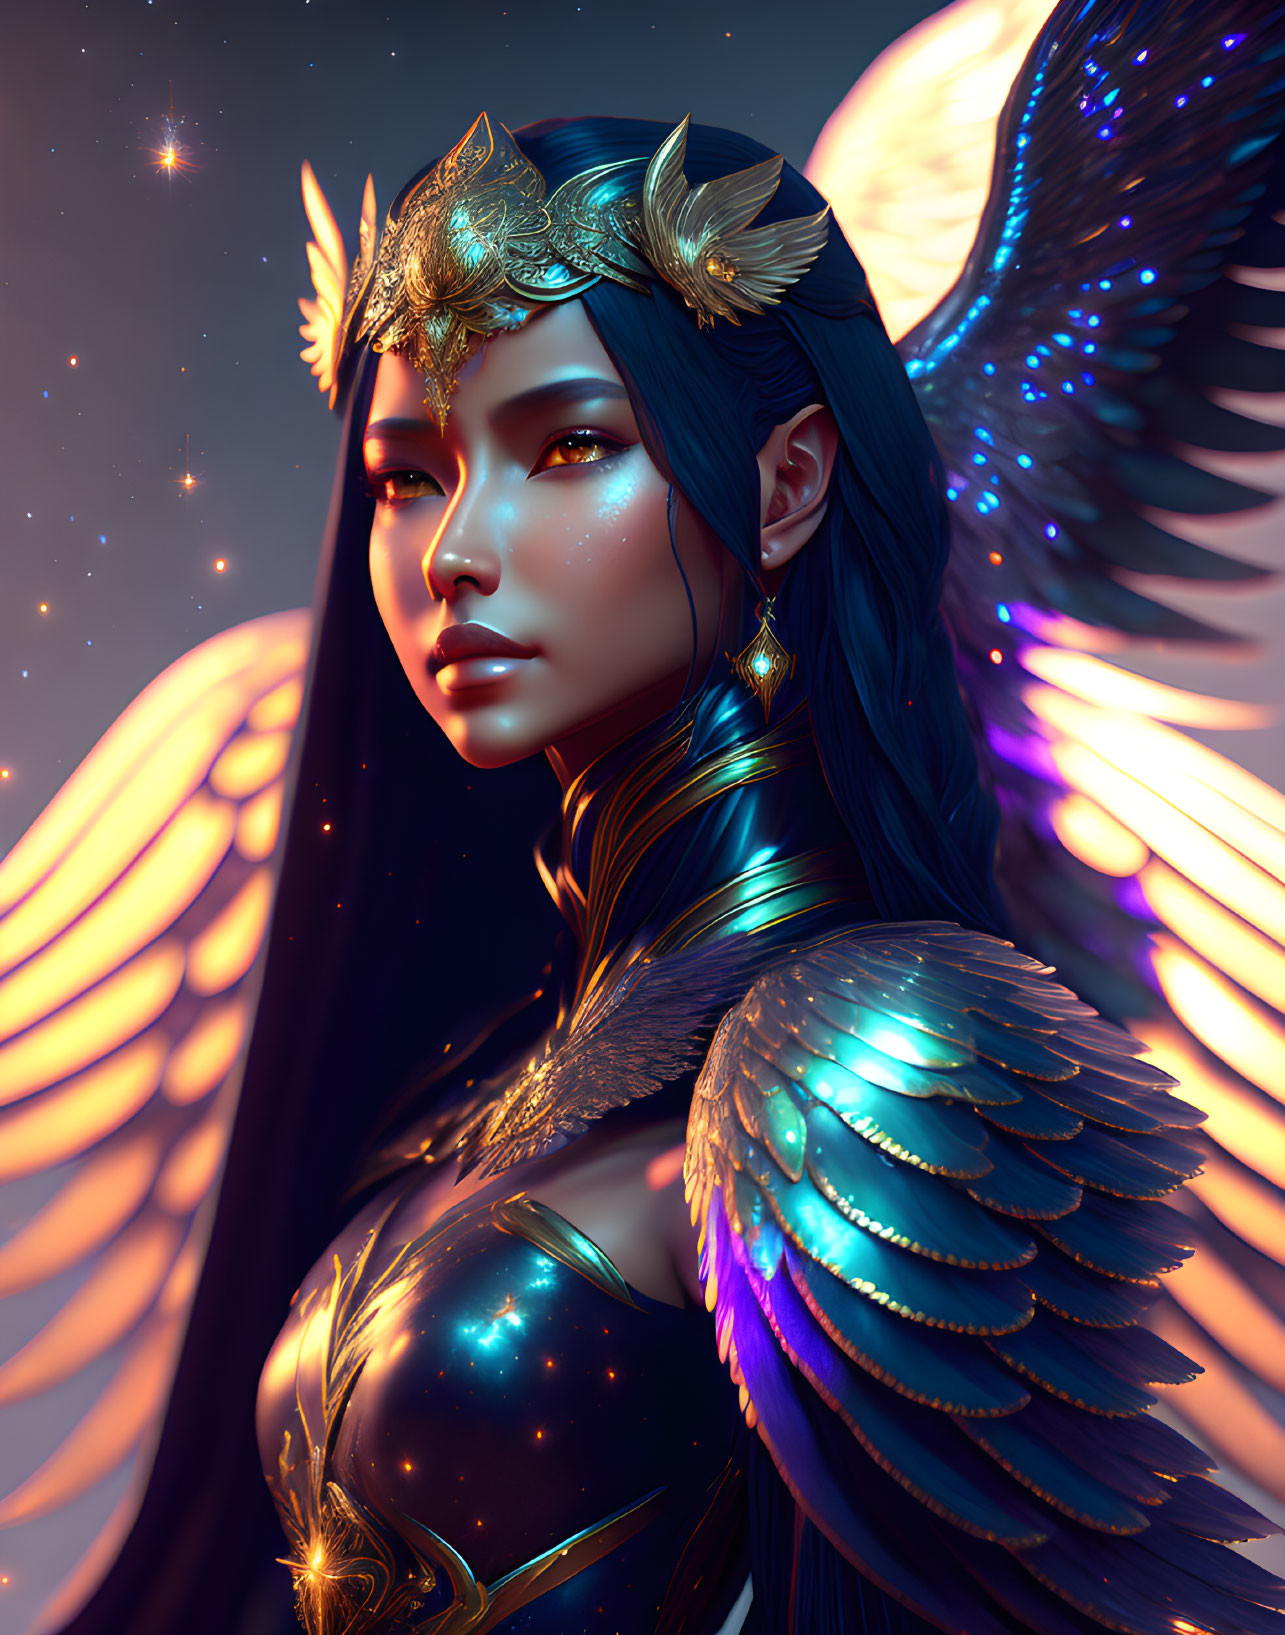 Mystical female figure with blue skin and angel wings in celestial-themed digital art